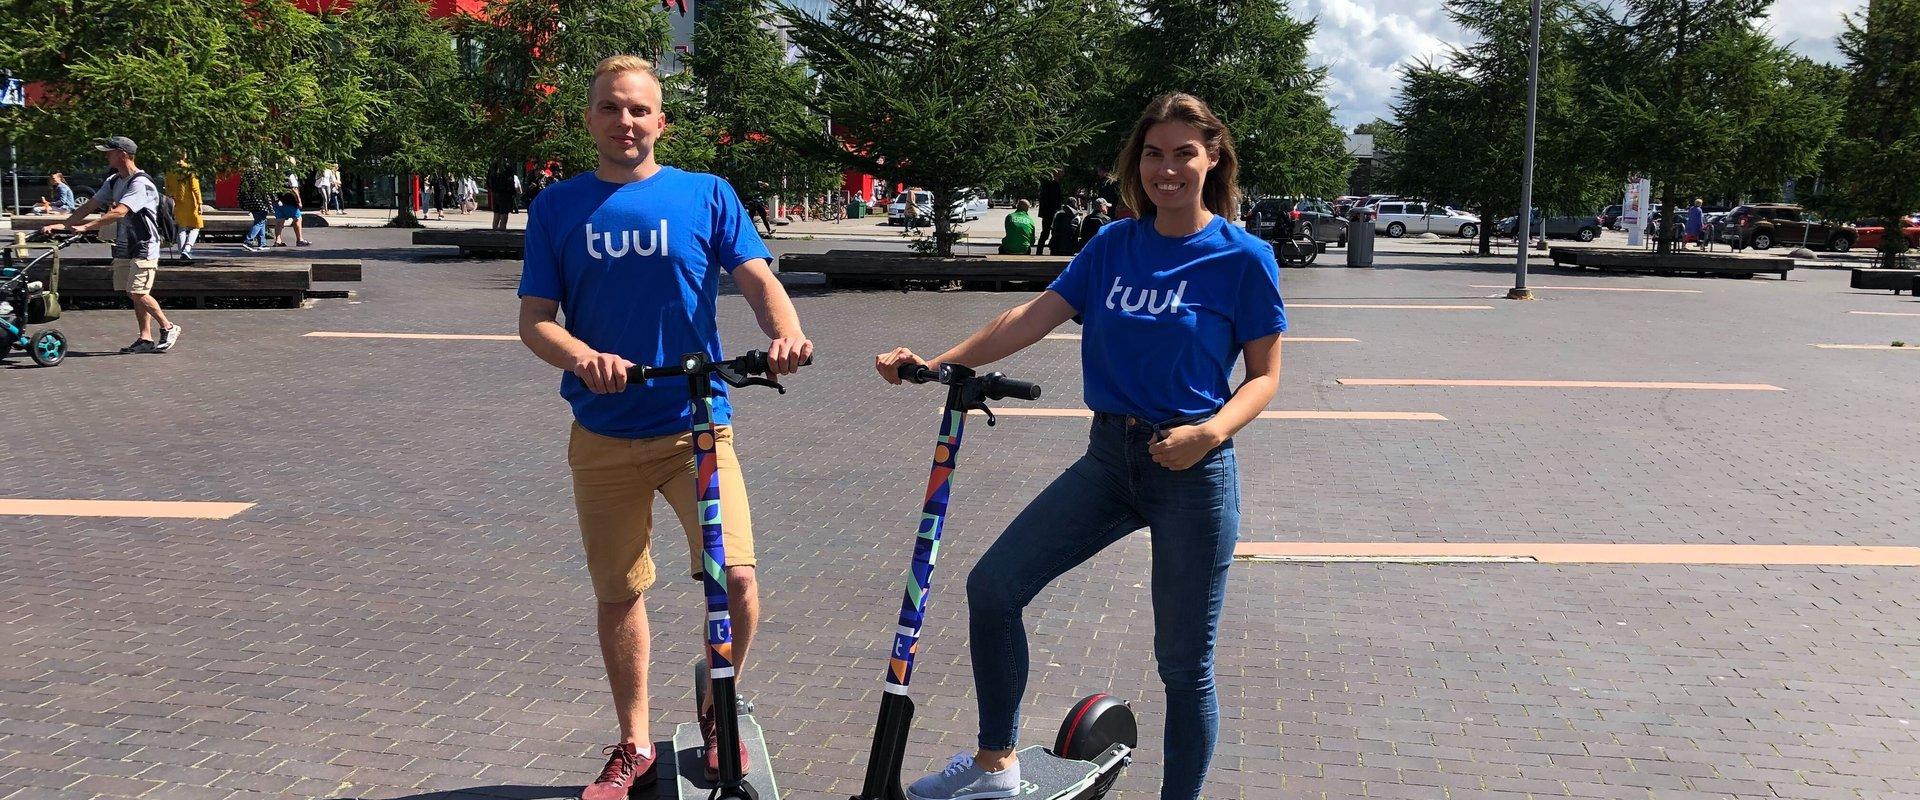 Discover Pärnu on electric scooters with a guide